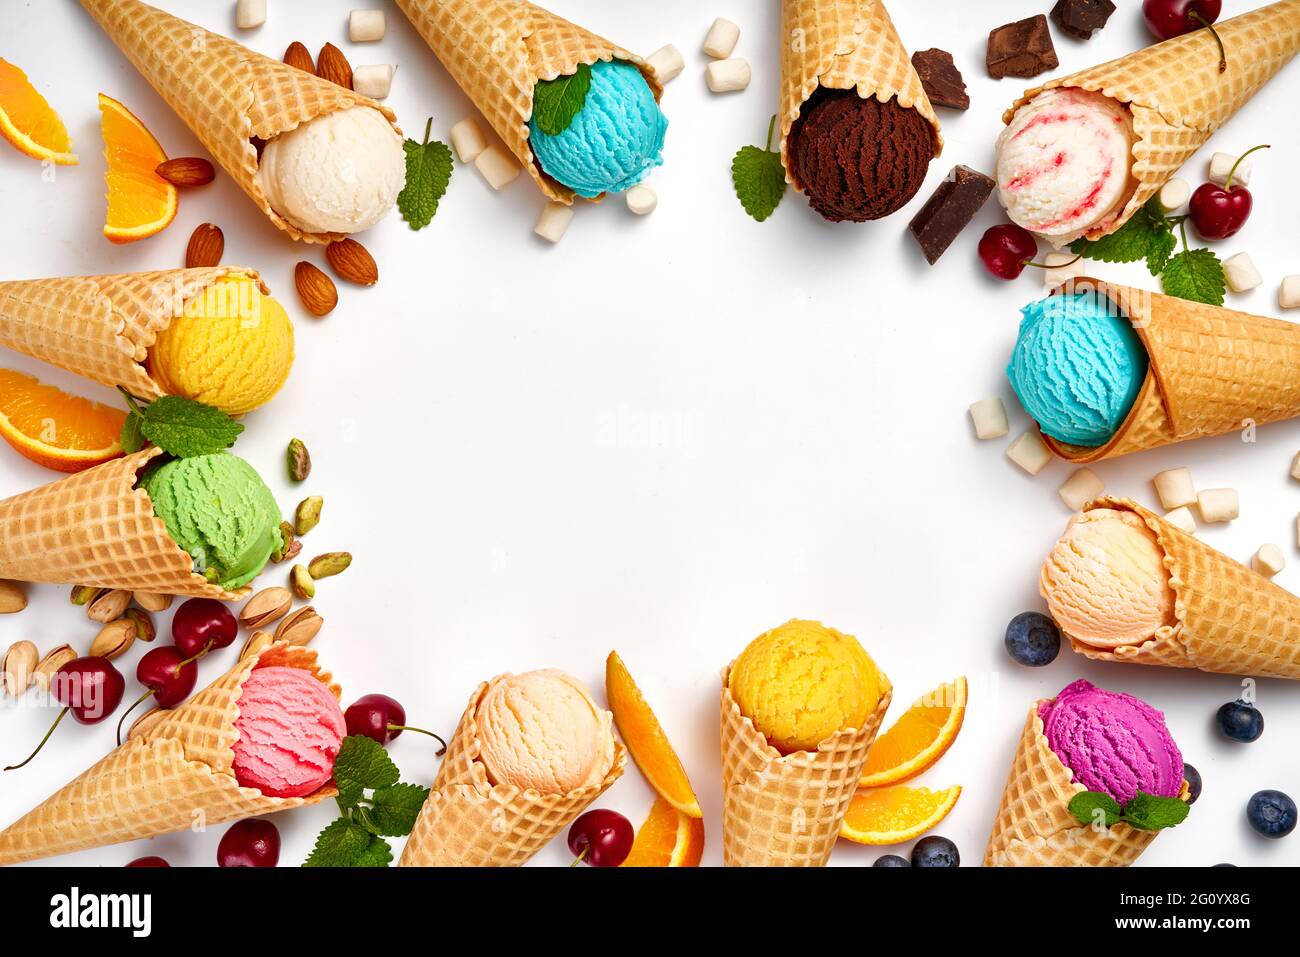 Assorted of ice cream in cones on white background. Colorful set of ice cream of different flavours. Ice cream isolated with nuts, fruits and berries. Stock Photo